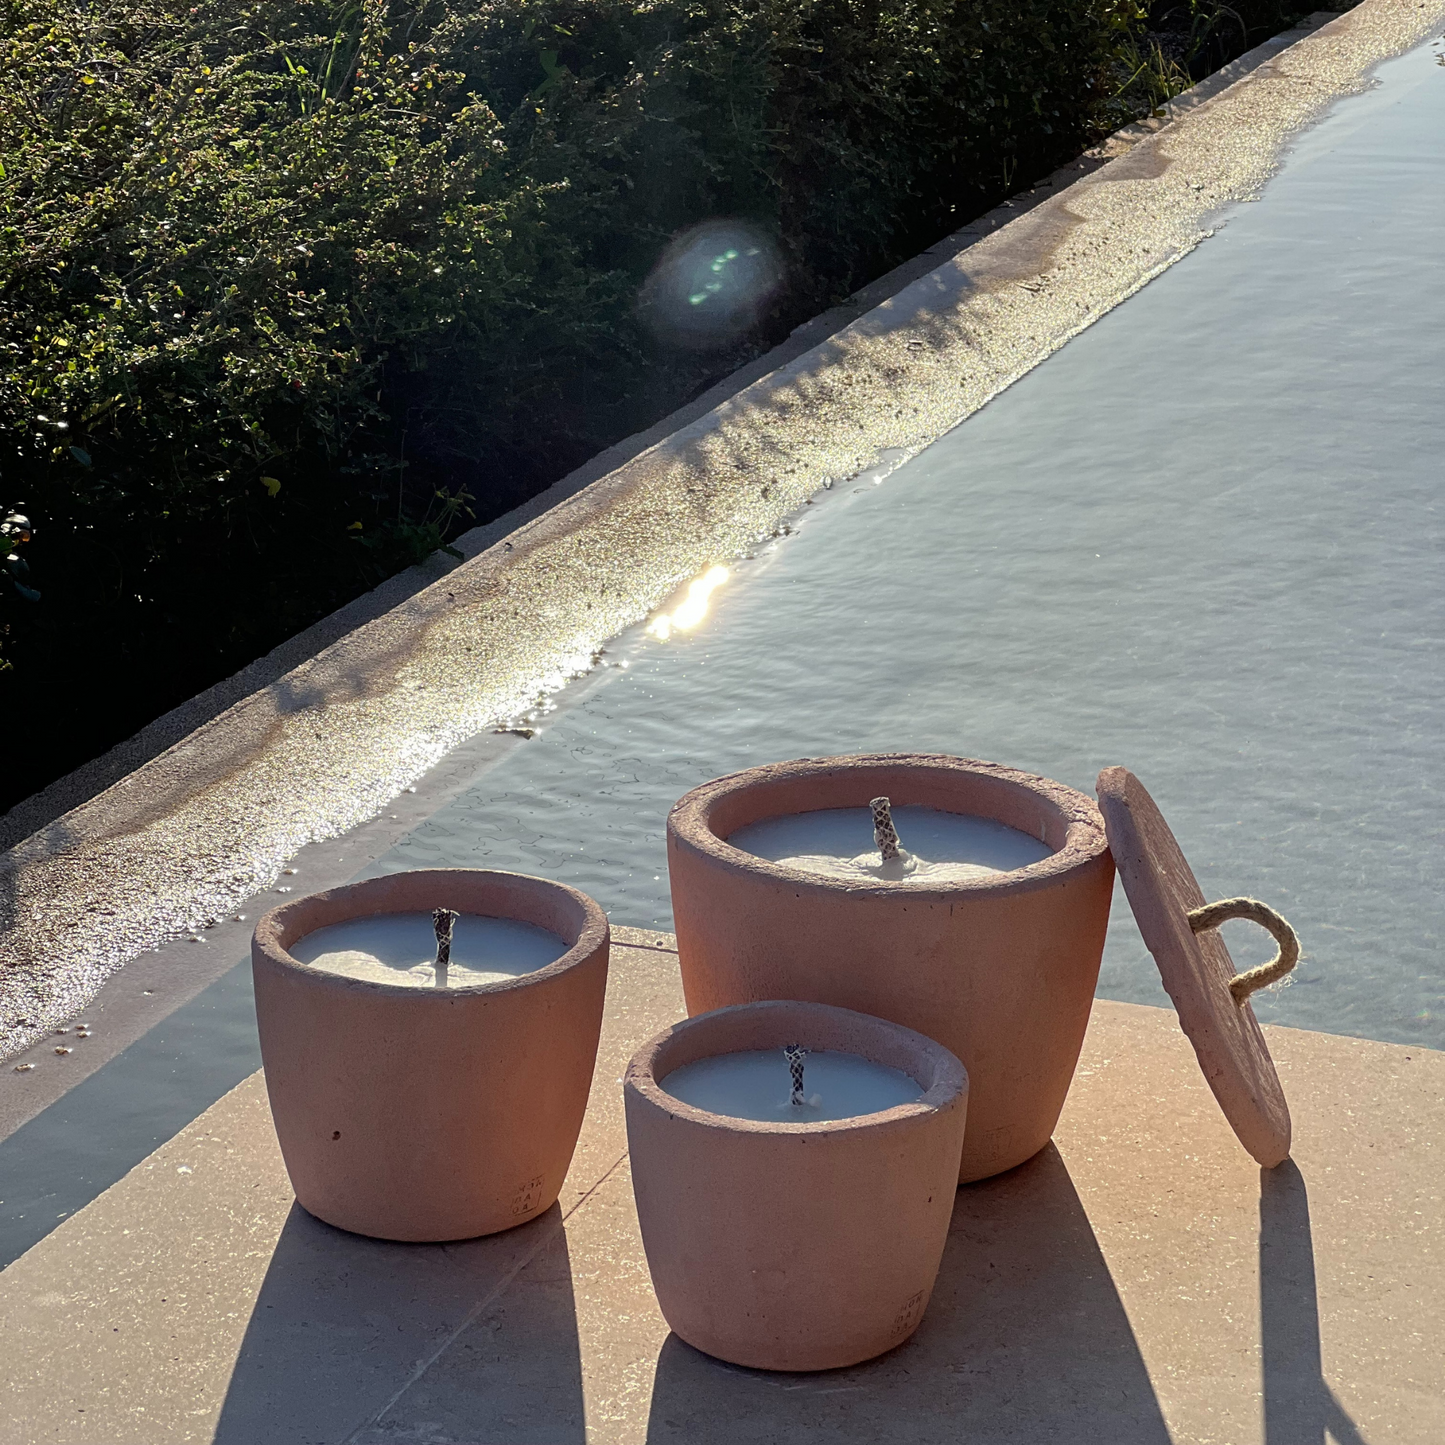 Urban Outdoor Candle Small - blush